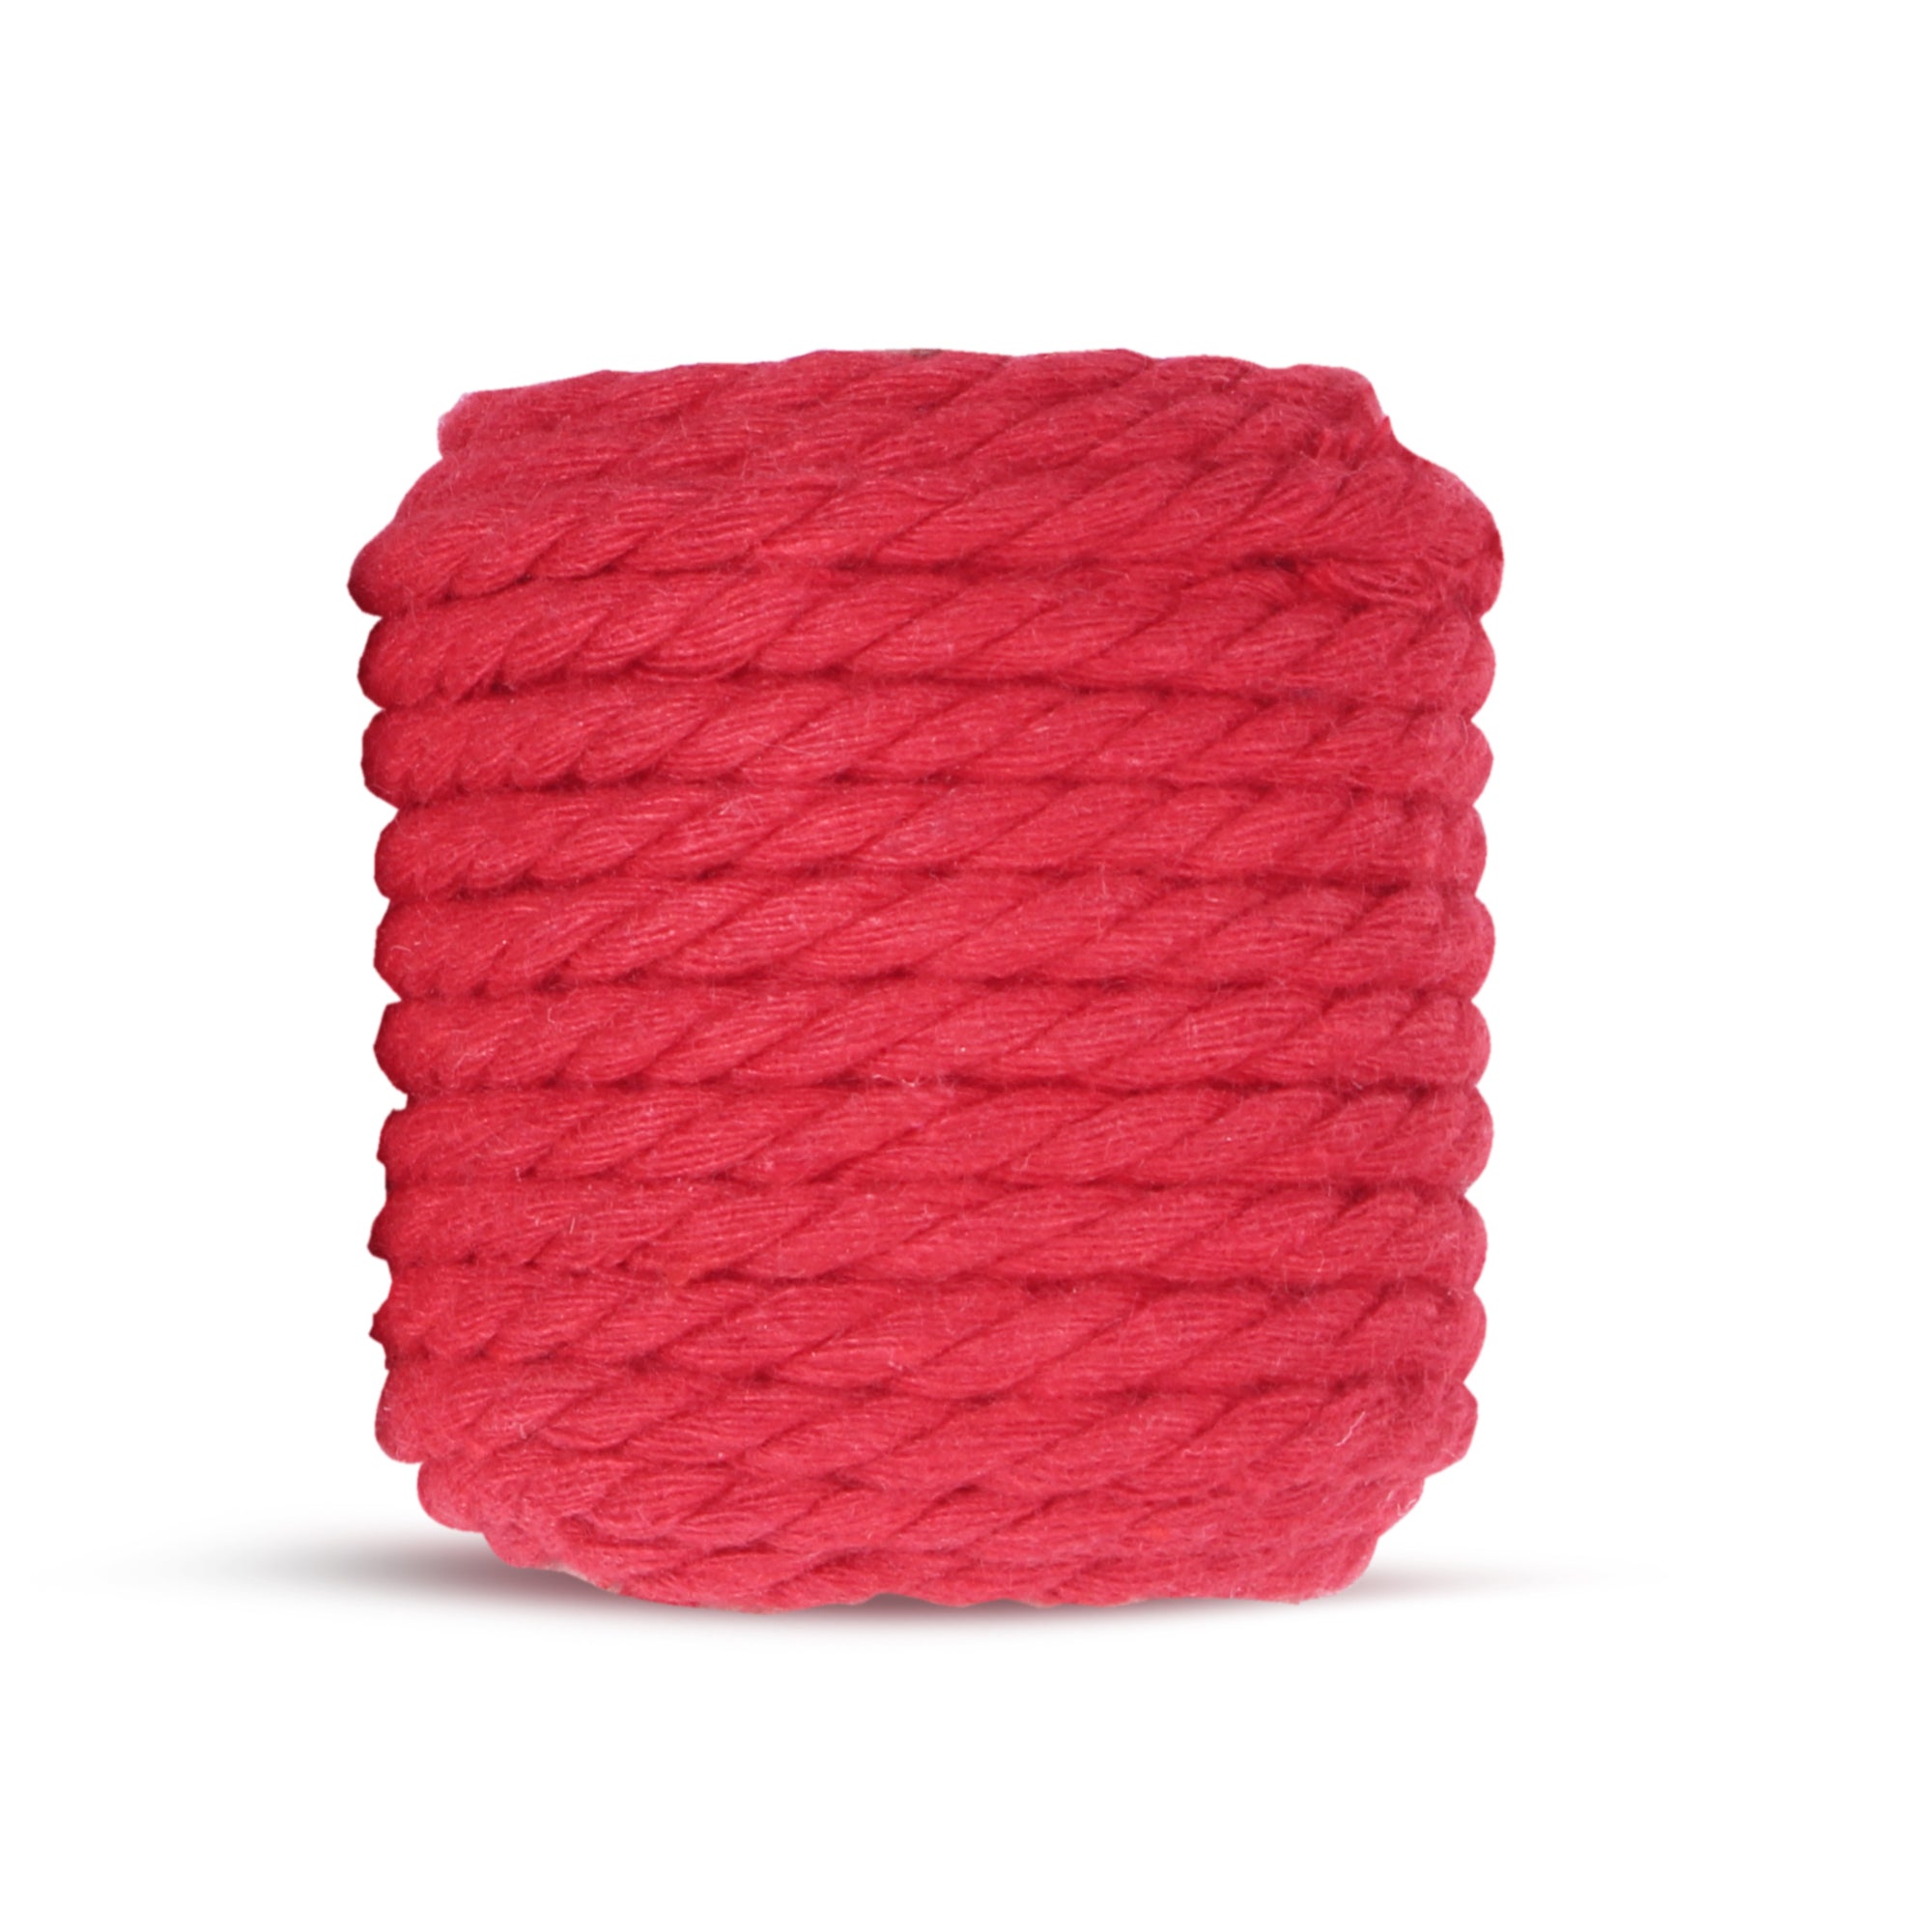 Cotton Twisted Cord 3Mm 3 Ply Rosy Charm 2Mtr 3Pc